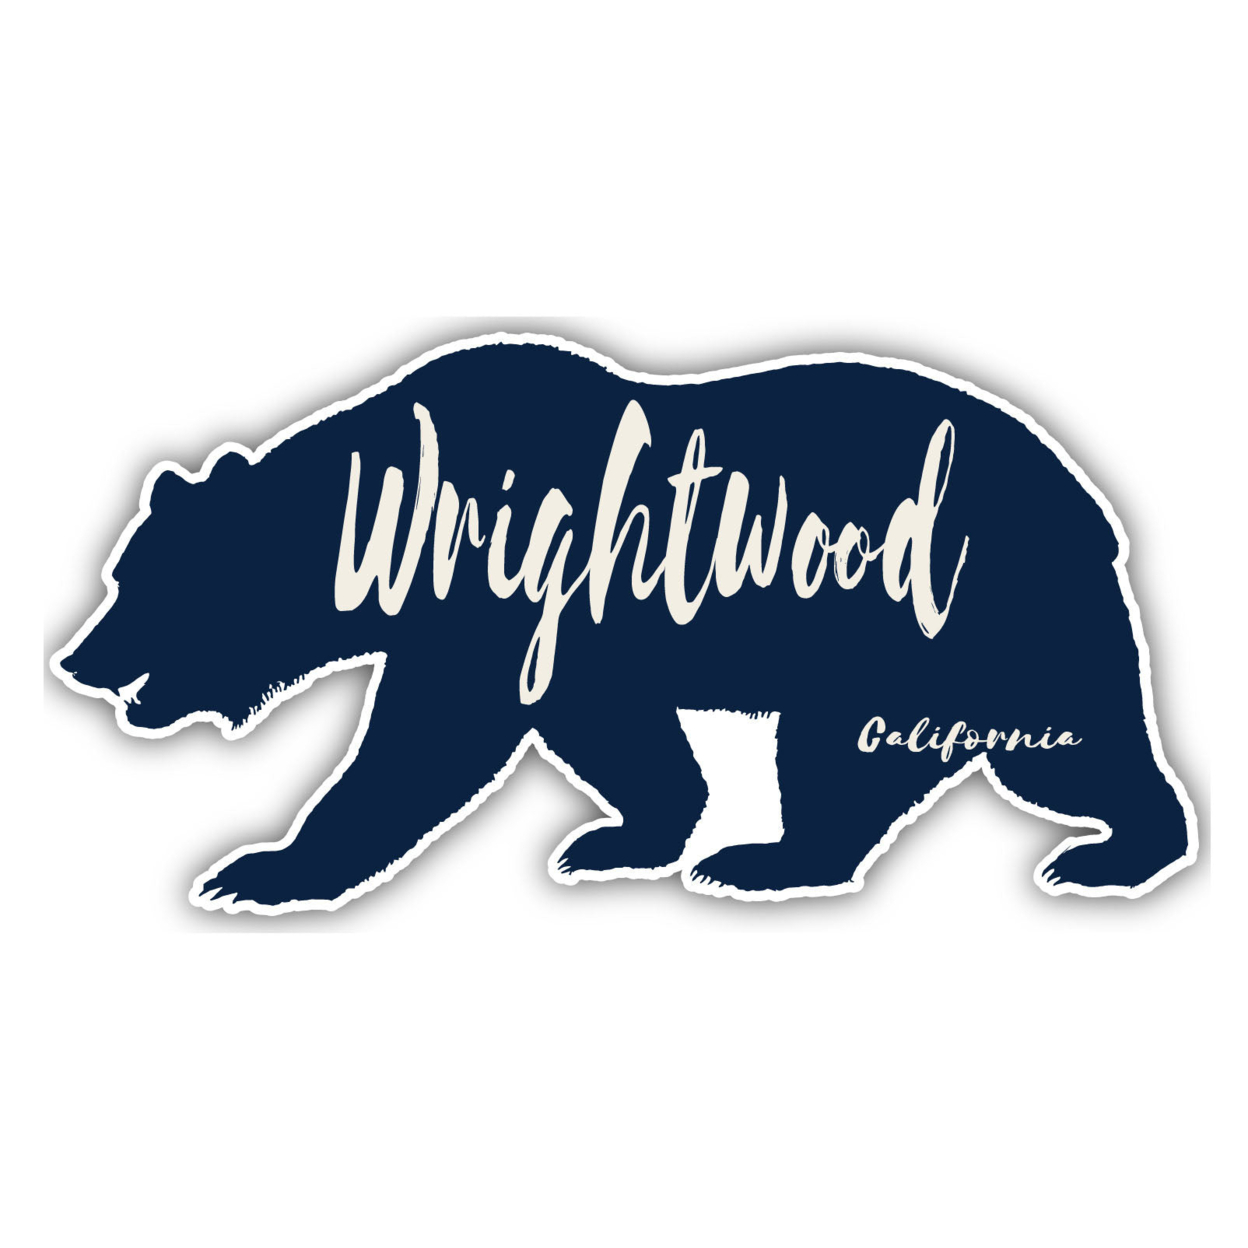 Wrightwood California Souvenir Decorative Stickers (Choose Theme And Size) - Single Unit, 4-Inch, Great Outdoors